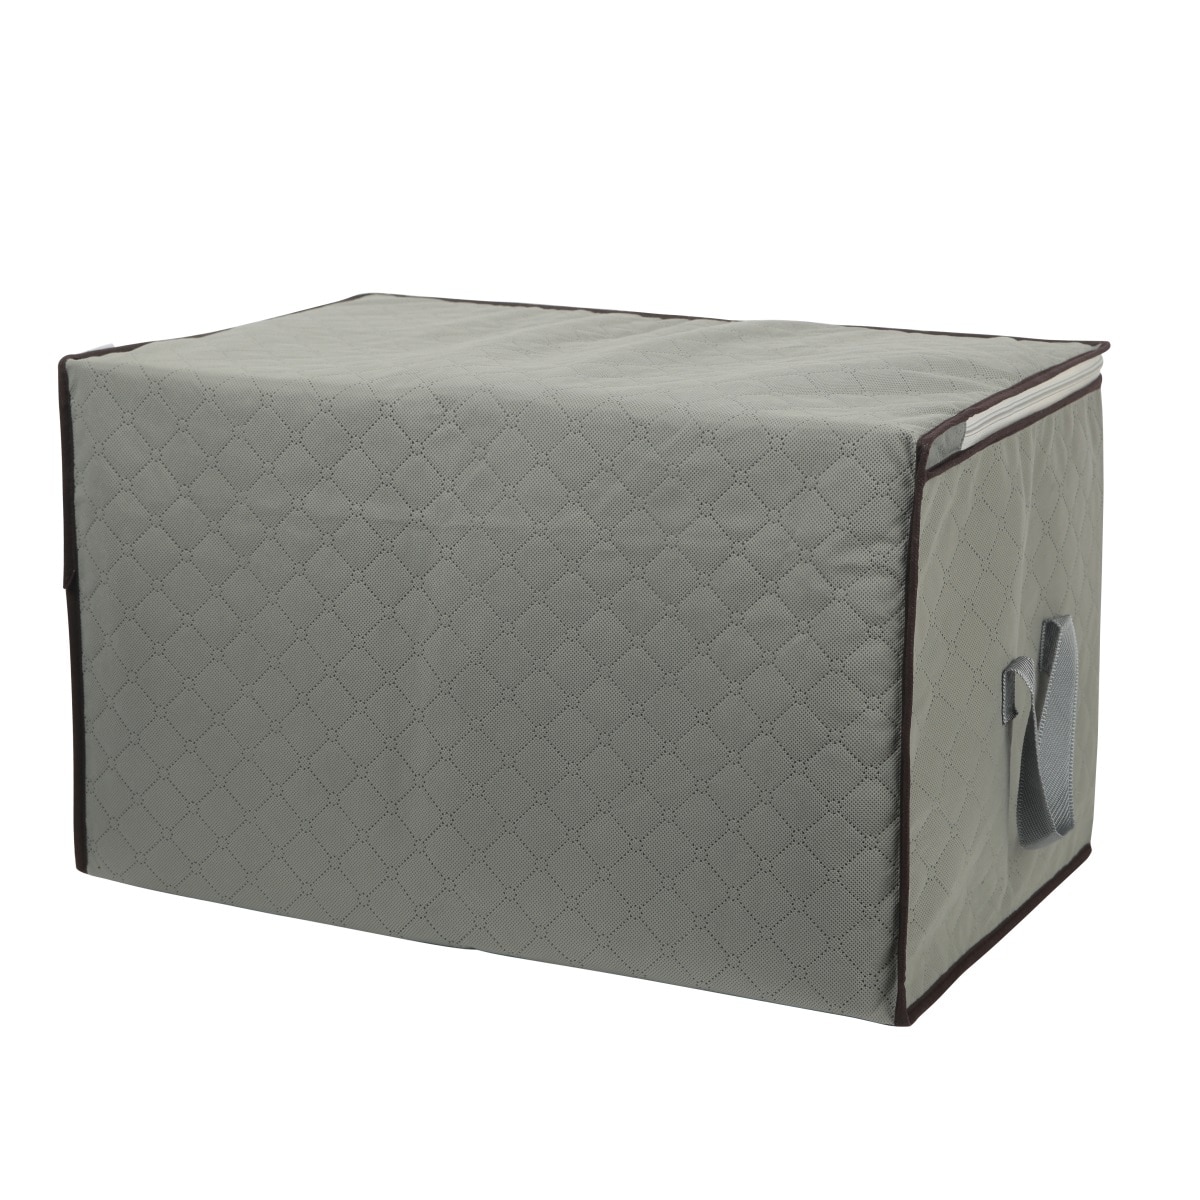 Large Foldable Clothing Storage Bag for Blanket Clothes Quilt Comforter Clothes Pillow Closet Organization Underbed Under Bed